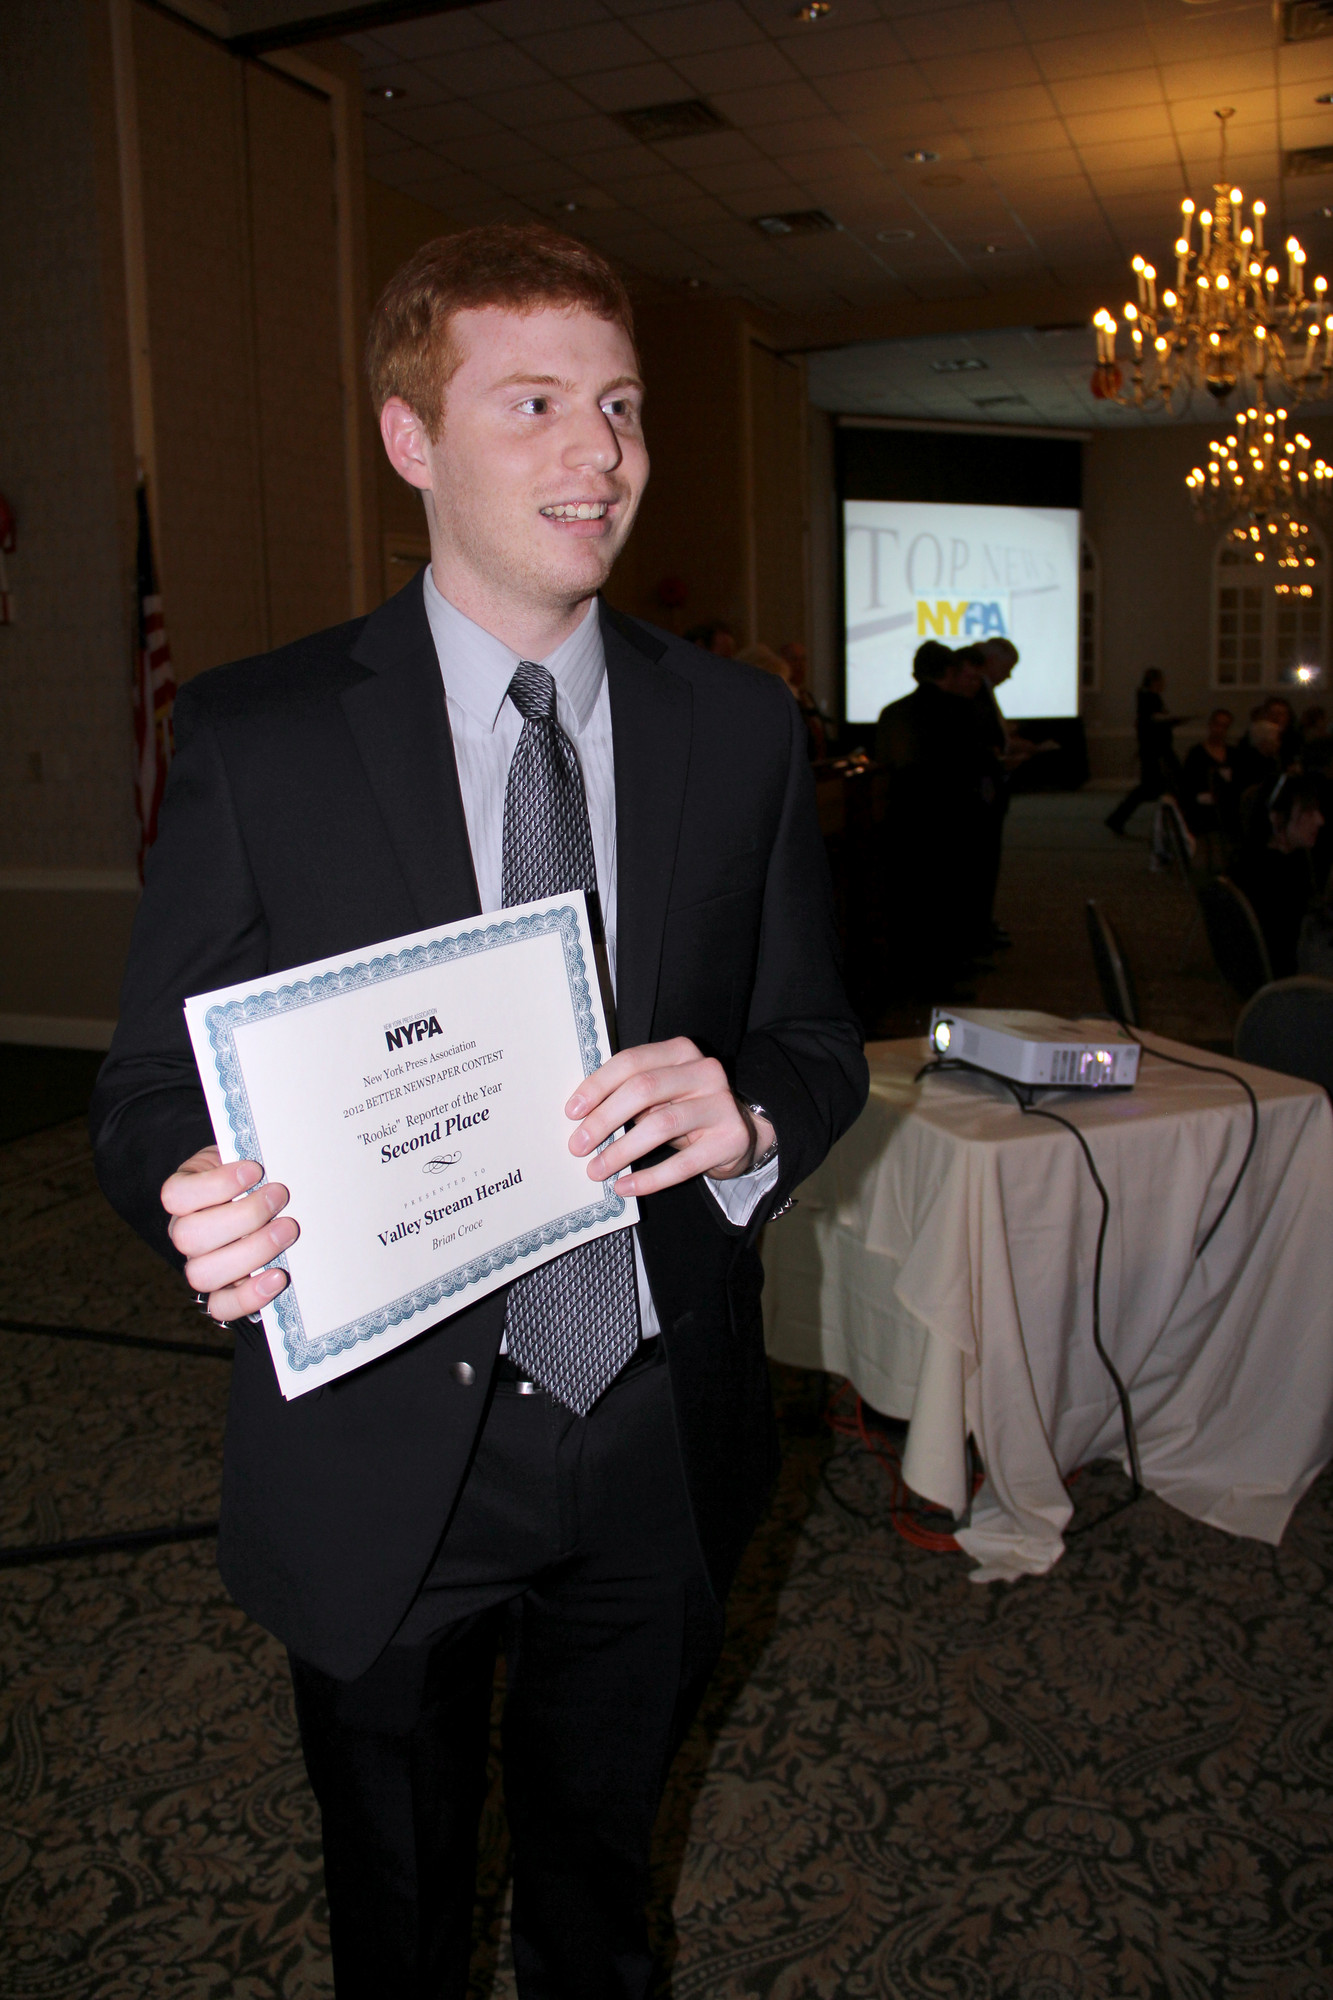 Reporter Brian Croce won second place in the Rookie Reporter of the Year category.